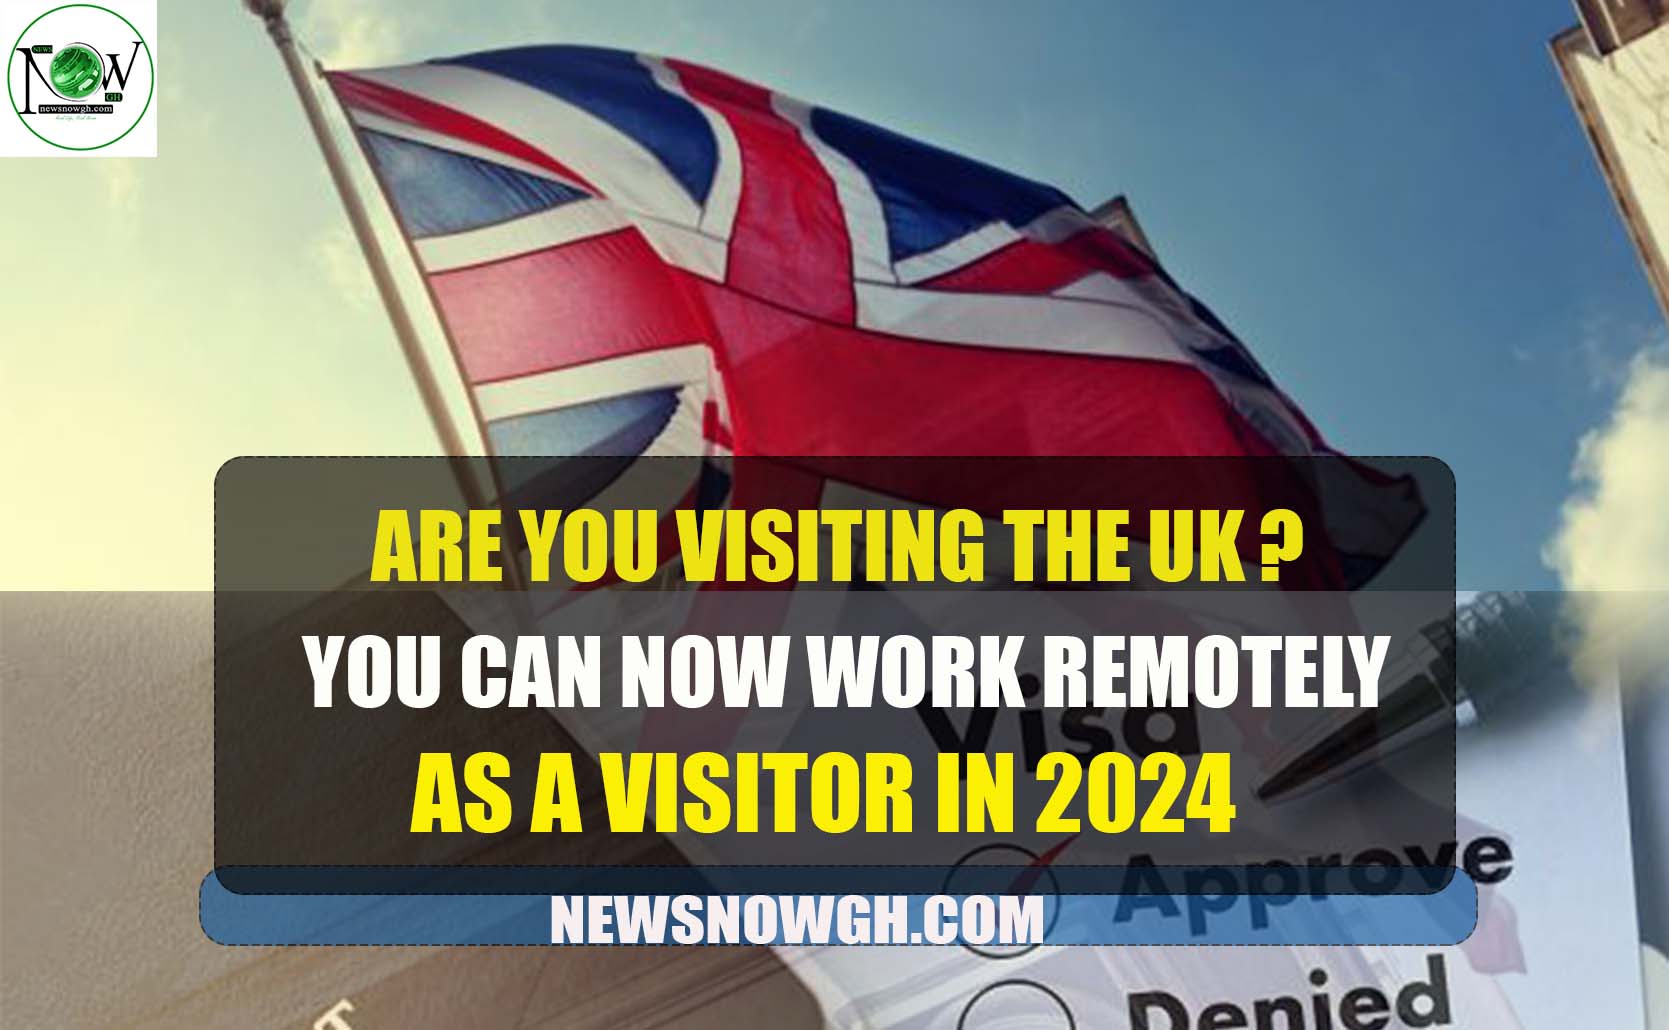 Are You Visiting the UK? You Can Now Work Remotely as a Visitor in 2024